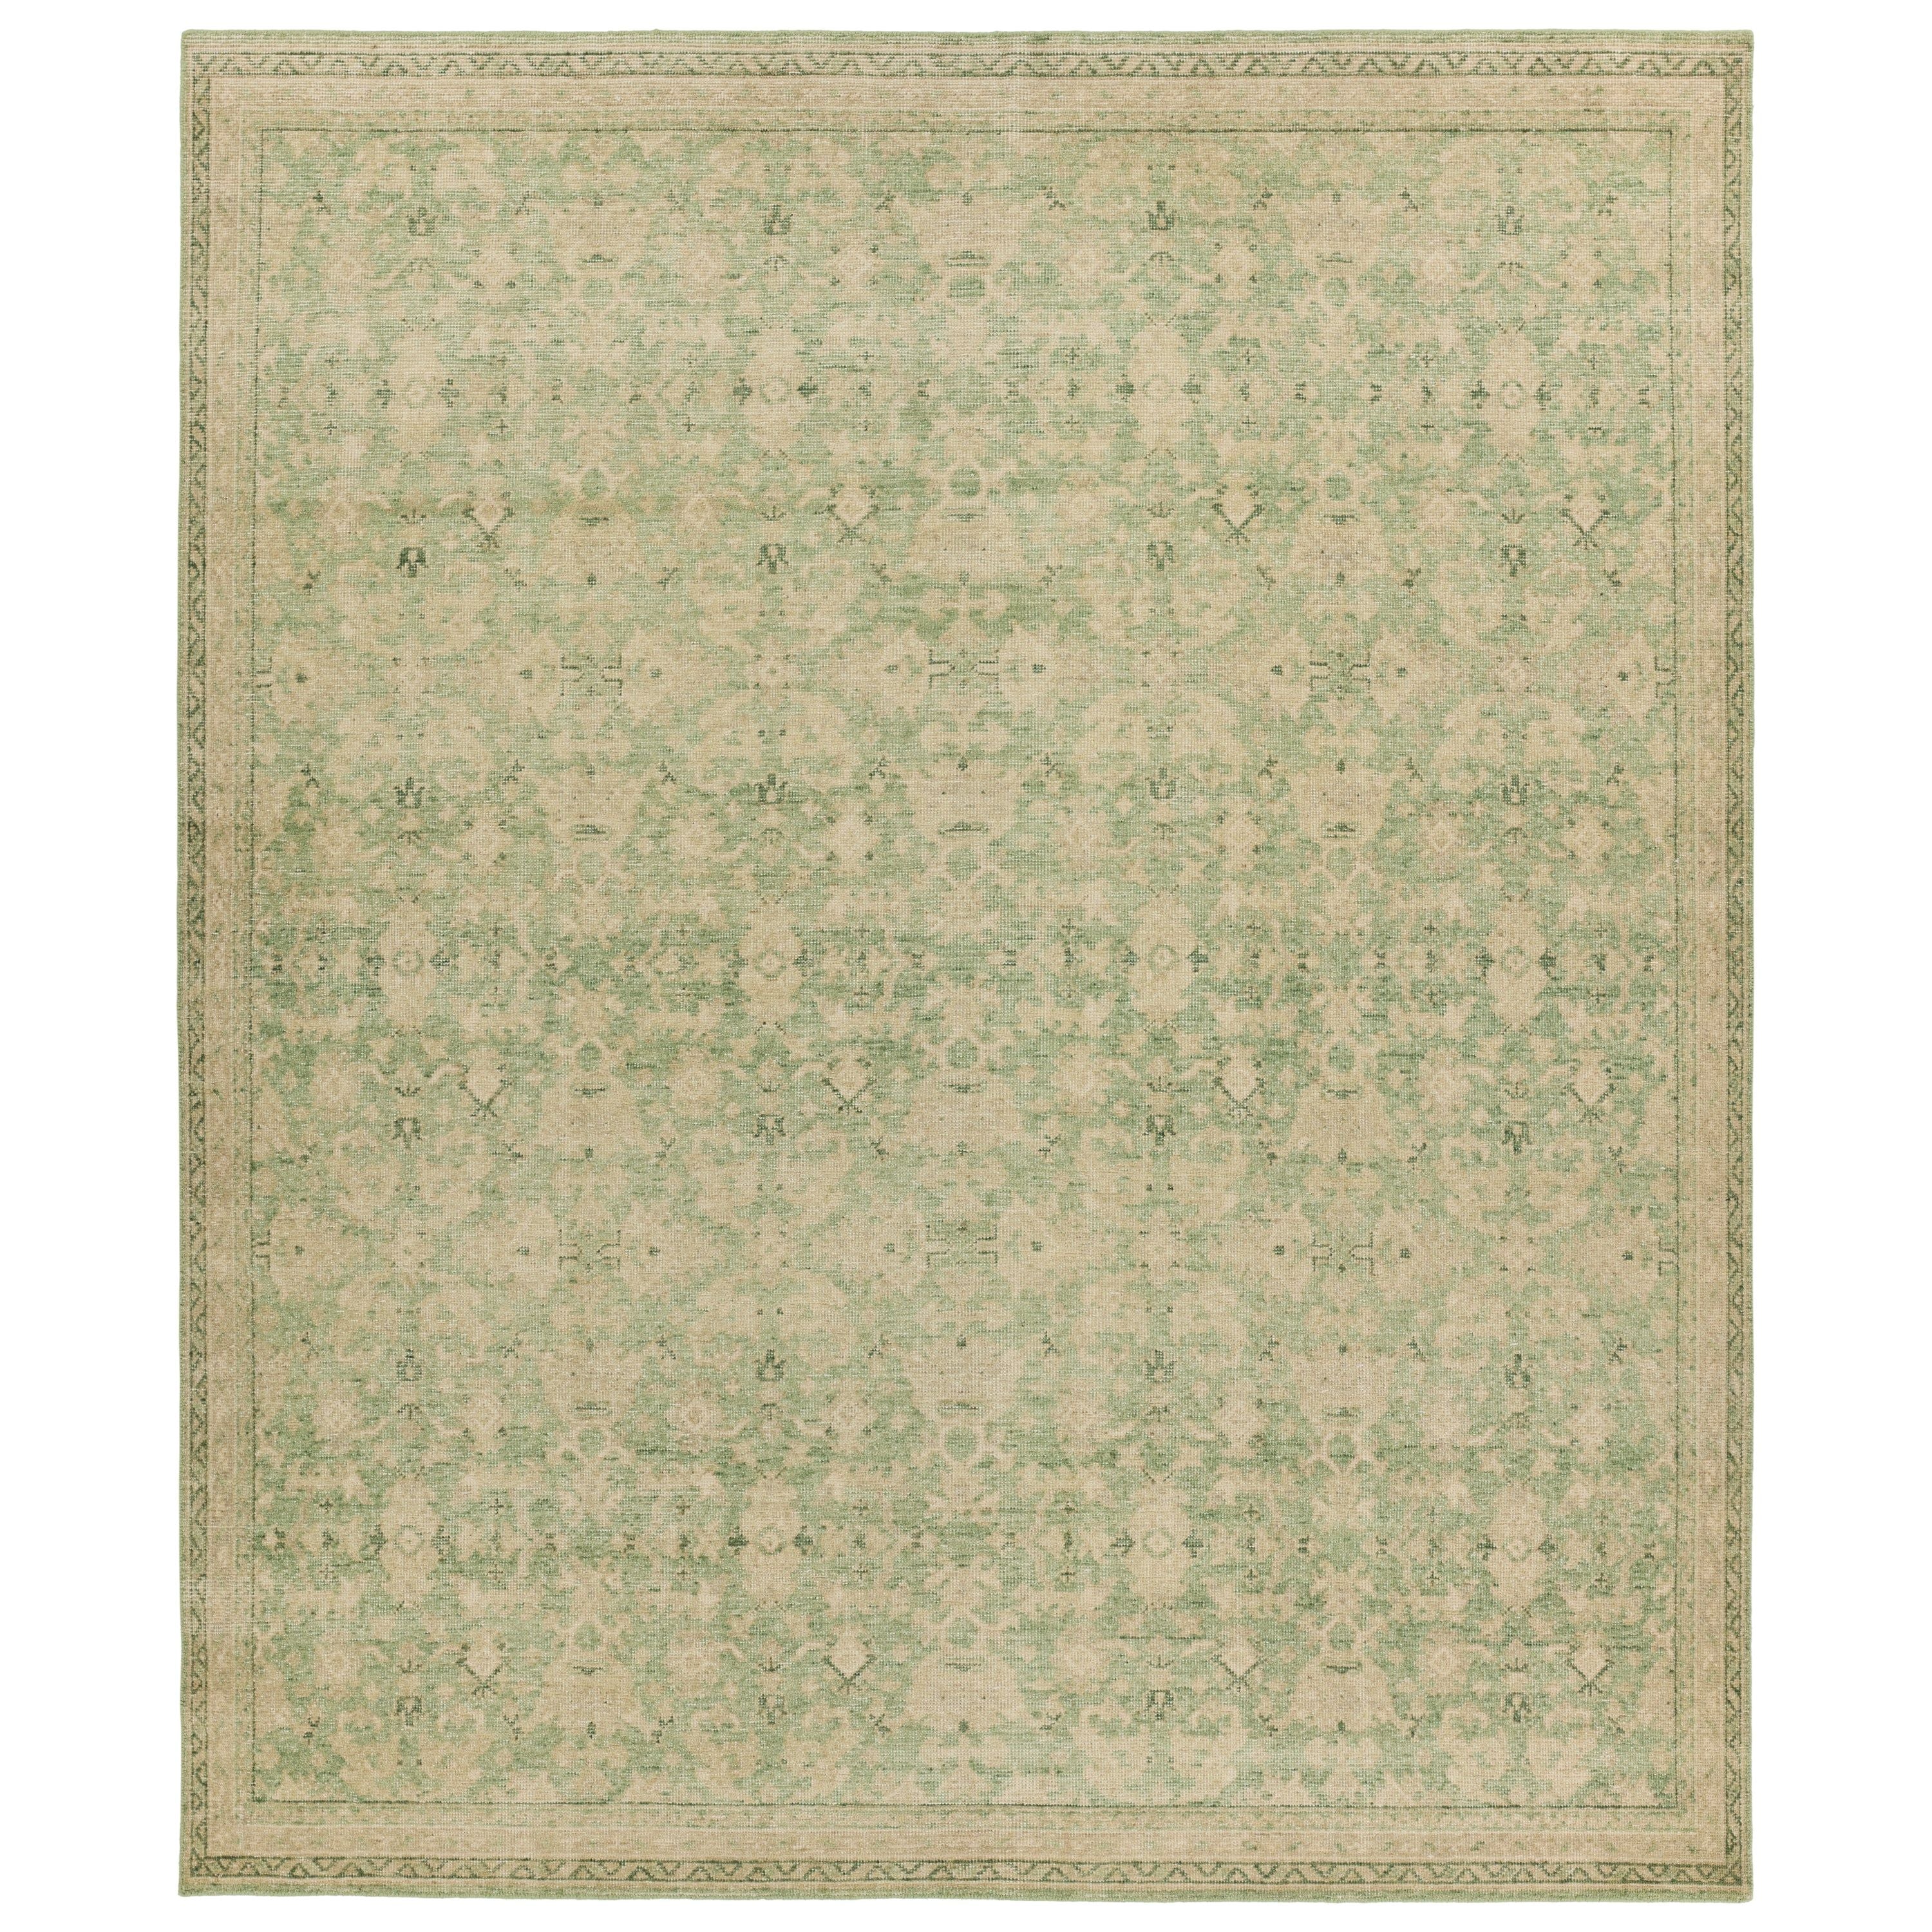 The Onessa collection marries traditional motifs with soft, subdued colorways for the perfect blend of fresh and time-honored style. These hand-knotted wool rugs feature a hand-sheared quality that lends the design a coveted vintage impression. The Rowland rug features a distressed, floral trellis pattern in hues of green, tan, and cream. Amethyst Home provides interior design, new construction, custom furniture, and area rugs in the Charlotte metro area.